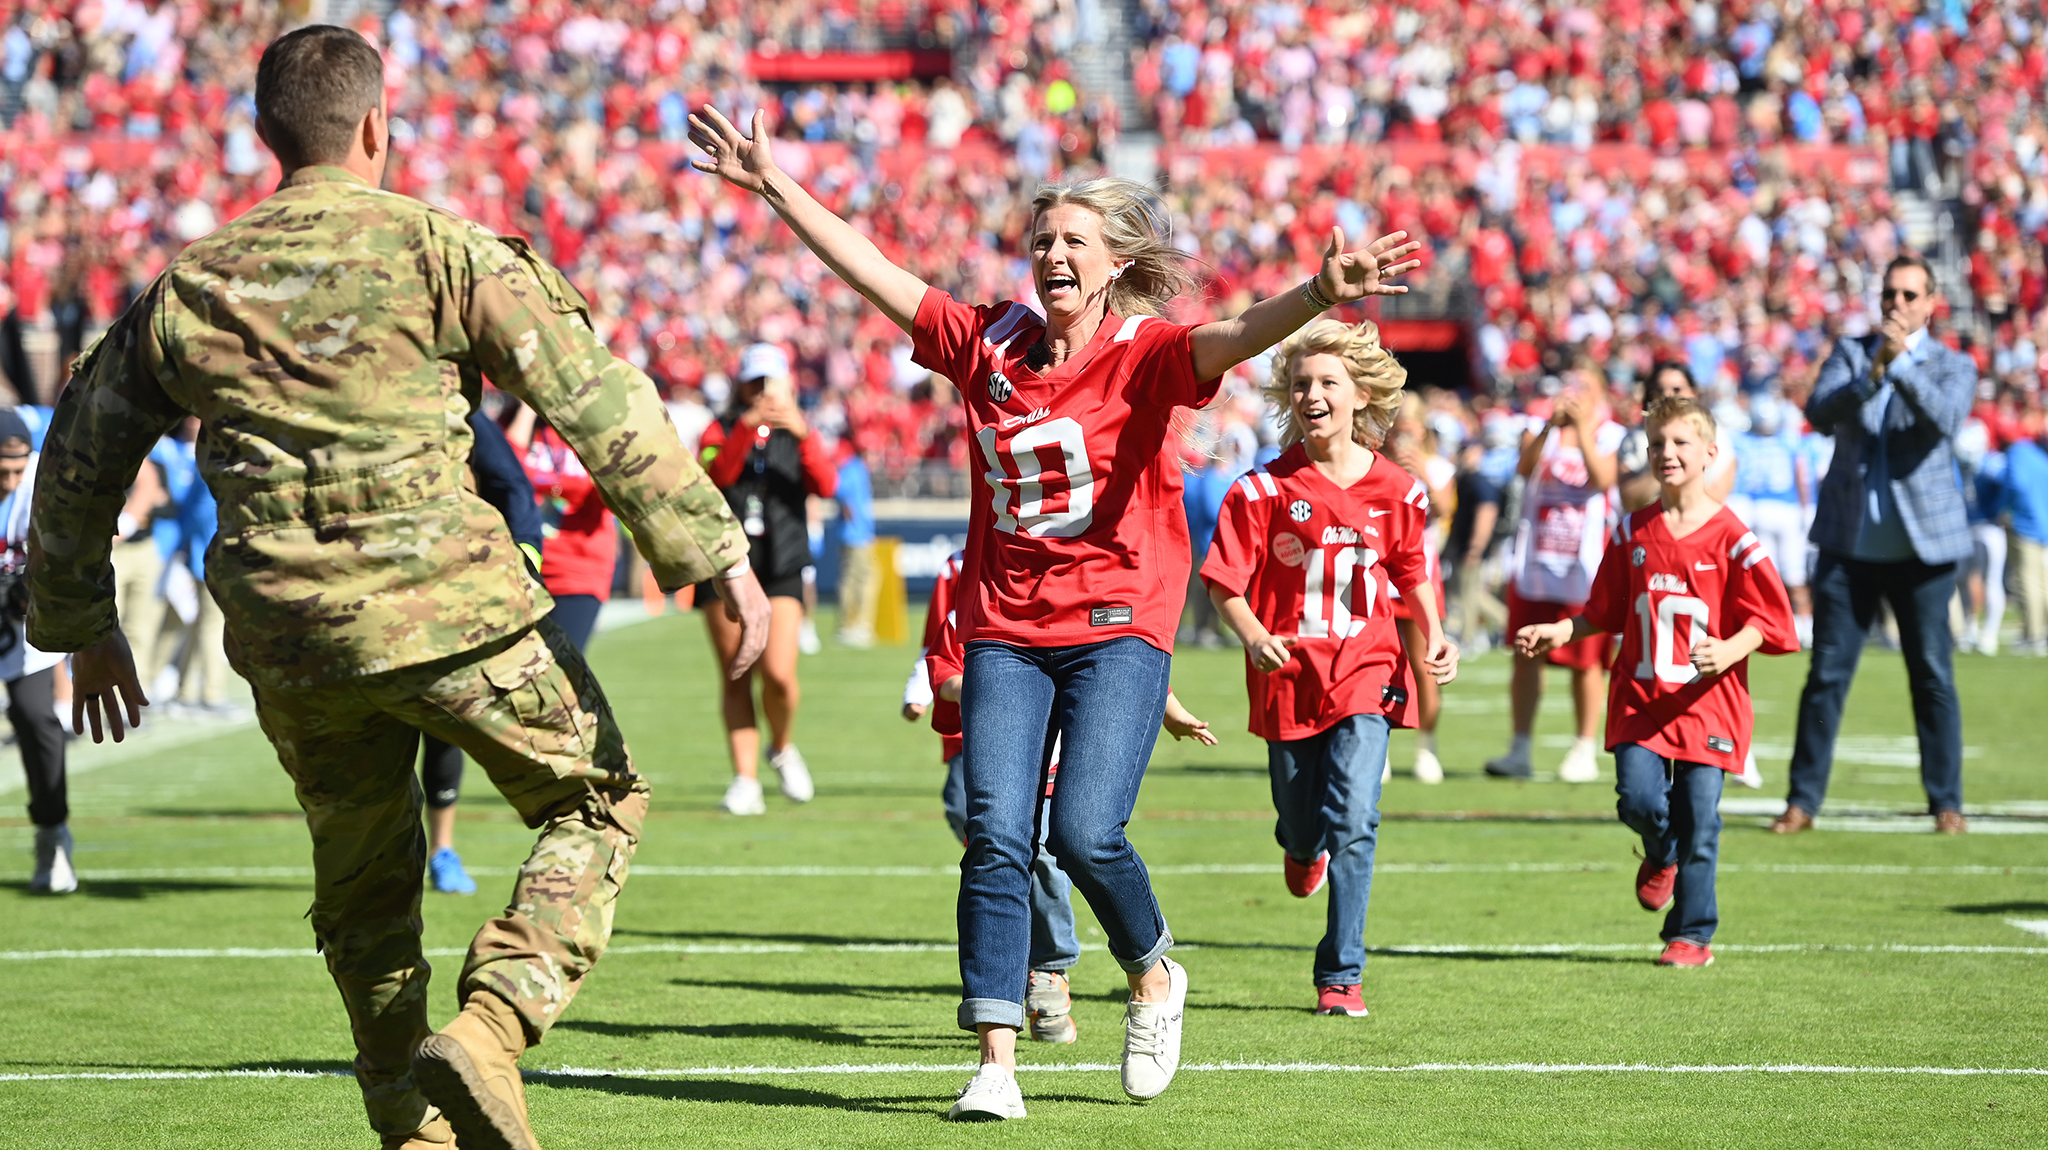 Elizabeth Rodgers (front) runs into the arms of her husband, Kyle Rodgers, at a surprise reunion during the first half of the Ole Miss-Texas A&M football game Saturday (Nov. 4). Kyle Rodgers returned from a 10-month deployment with the Army National Guard to reunite with his family as a part of Ole Miss Wish, a philanthropic effort of the University of Mississippi Office of Veteran and Military Services that seeks to give military families memorable experiences. Photo by Thomas Graning/Ole Miss Digital Imaging Services